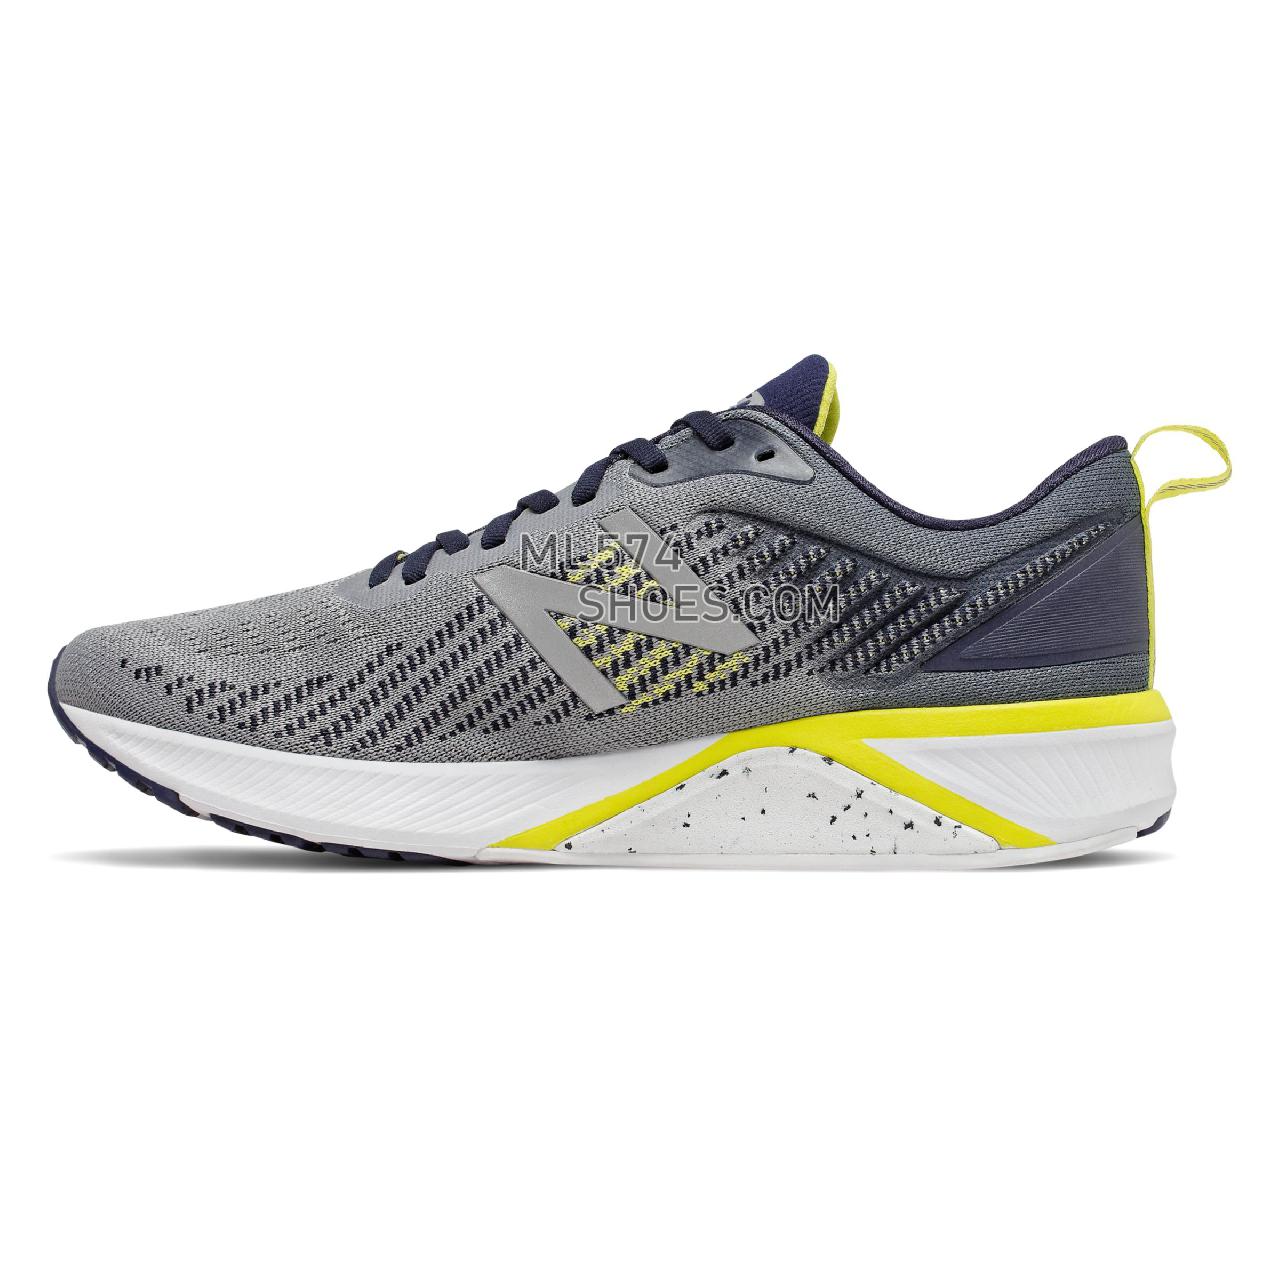 New Balance 870v5 - Men's Stability Running - Gunmetal with Pigment and Sulphur Yellow - M870GY5